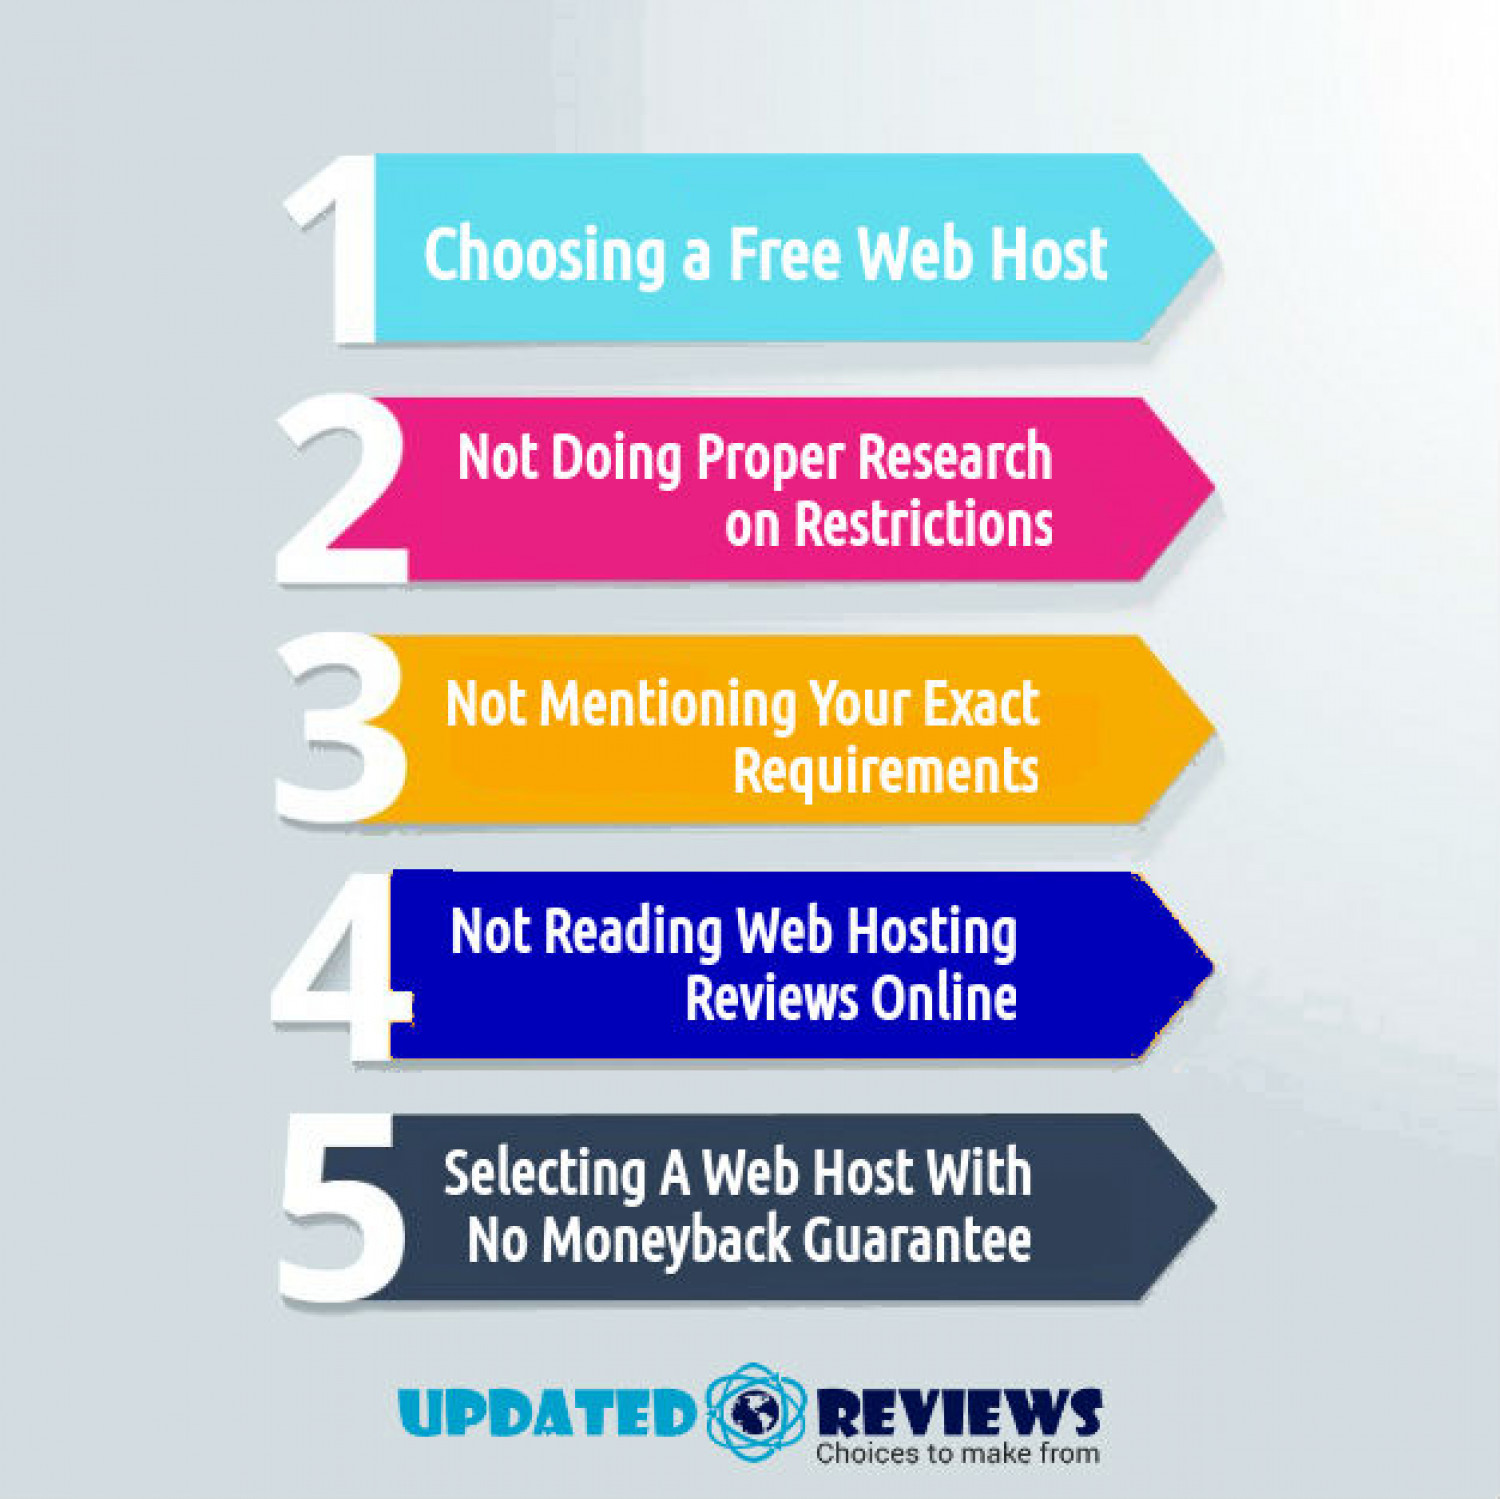 Web Hosting Mistakes Infographic